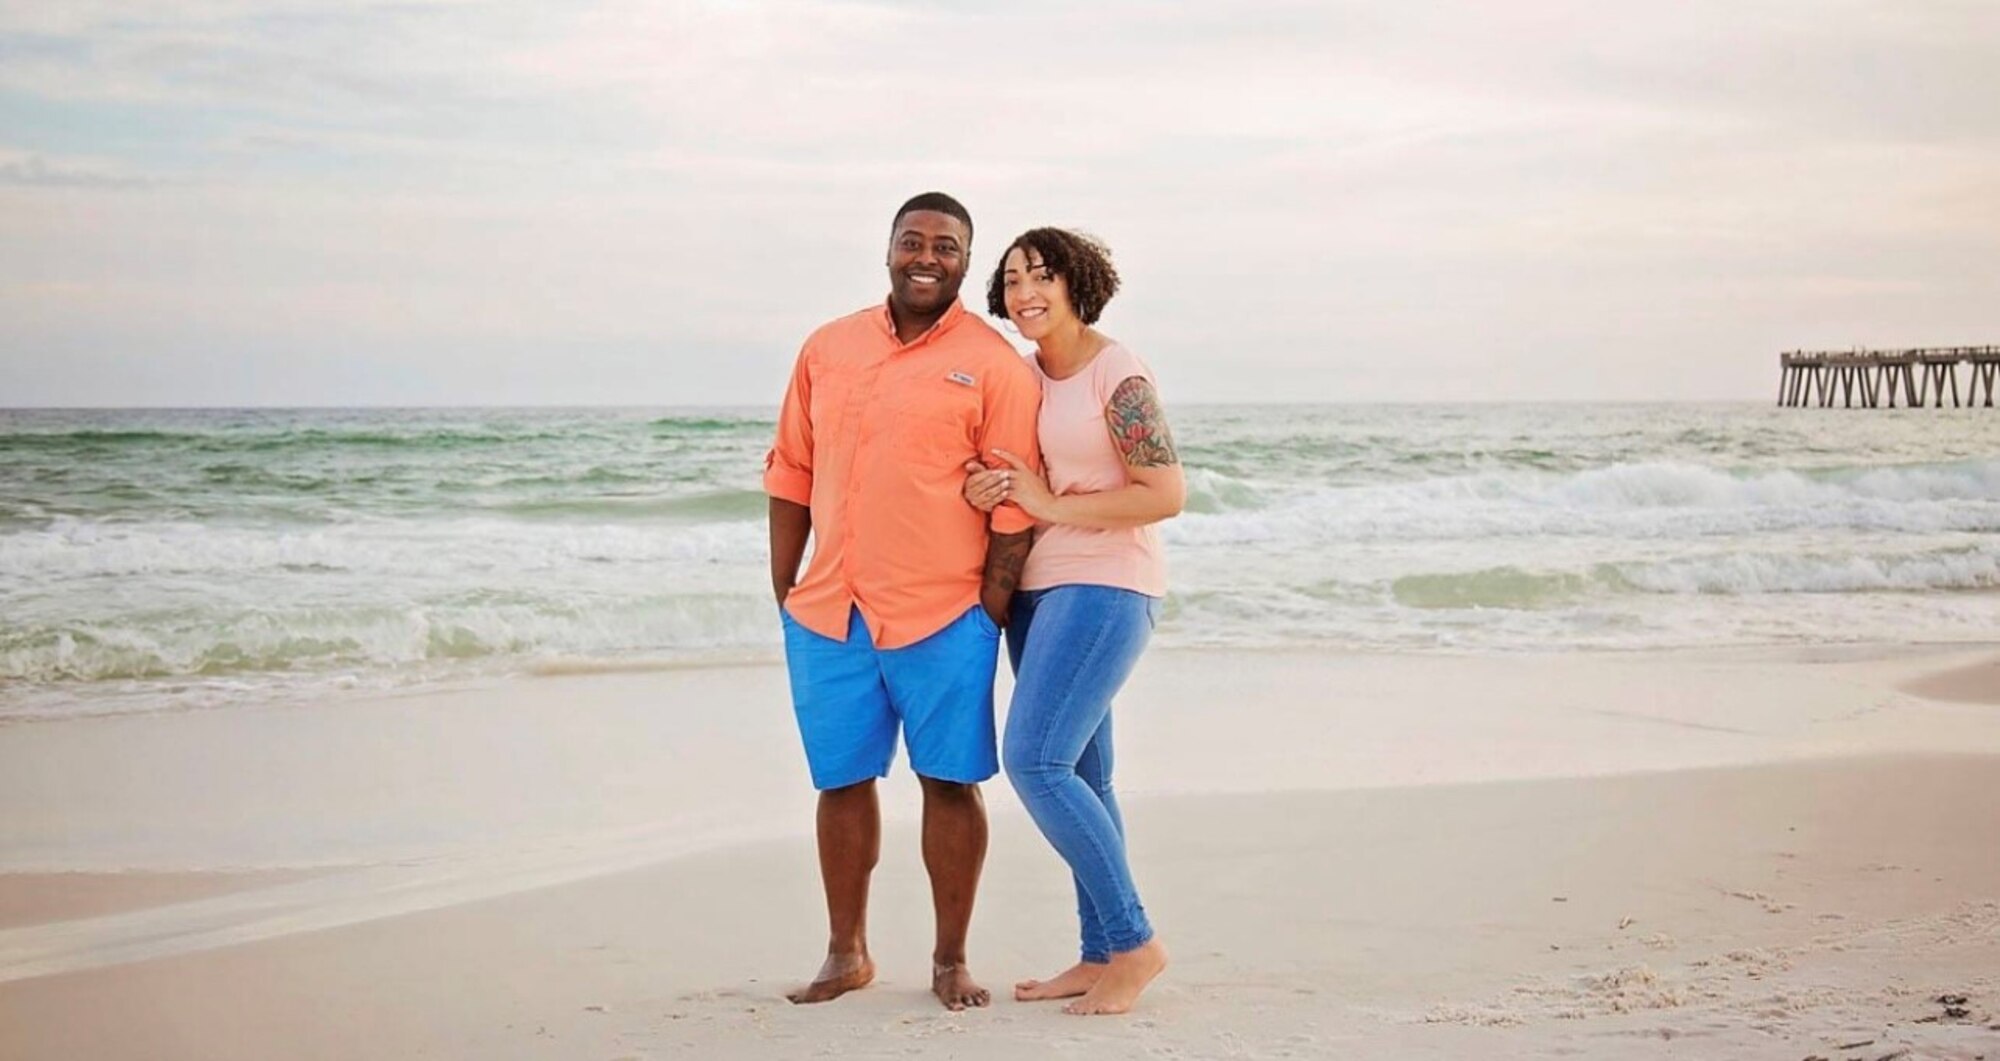 U.S. Air Force Master Sgt. Kelvin Lucky, 97th Security Forces Squadron operations superintendent, poses with his wife, Master Sgt. JaNiece Lucky, 97th Logistics Readiness Squadron first sergeant, on the beach, the day before Kelvin’s deployment in 2019. The secret to the Lucky's long lasting relationship is that they always have each other’s backs. (Courtesy photo by Master Sgt. JaNiece Lucky)